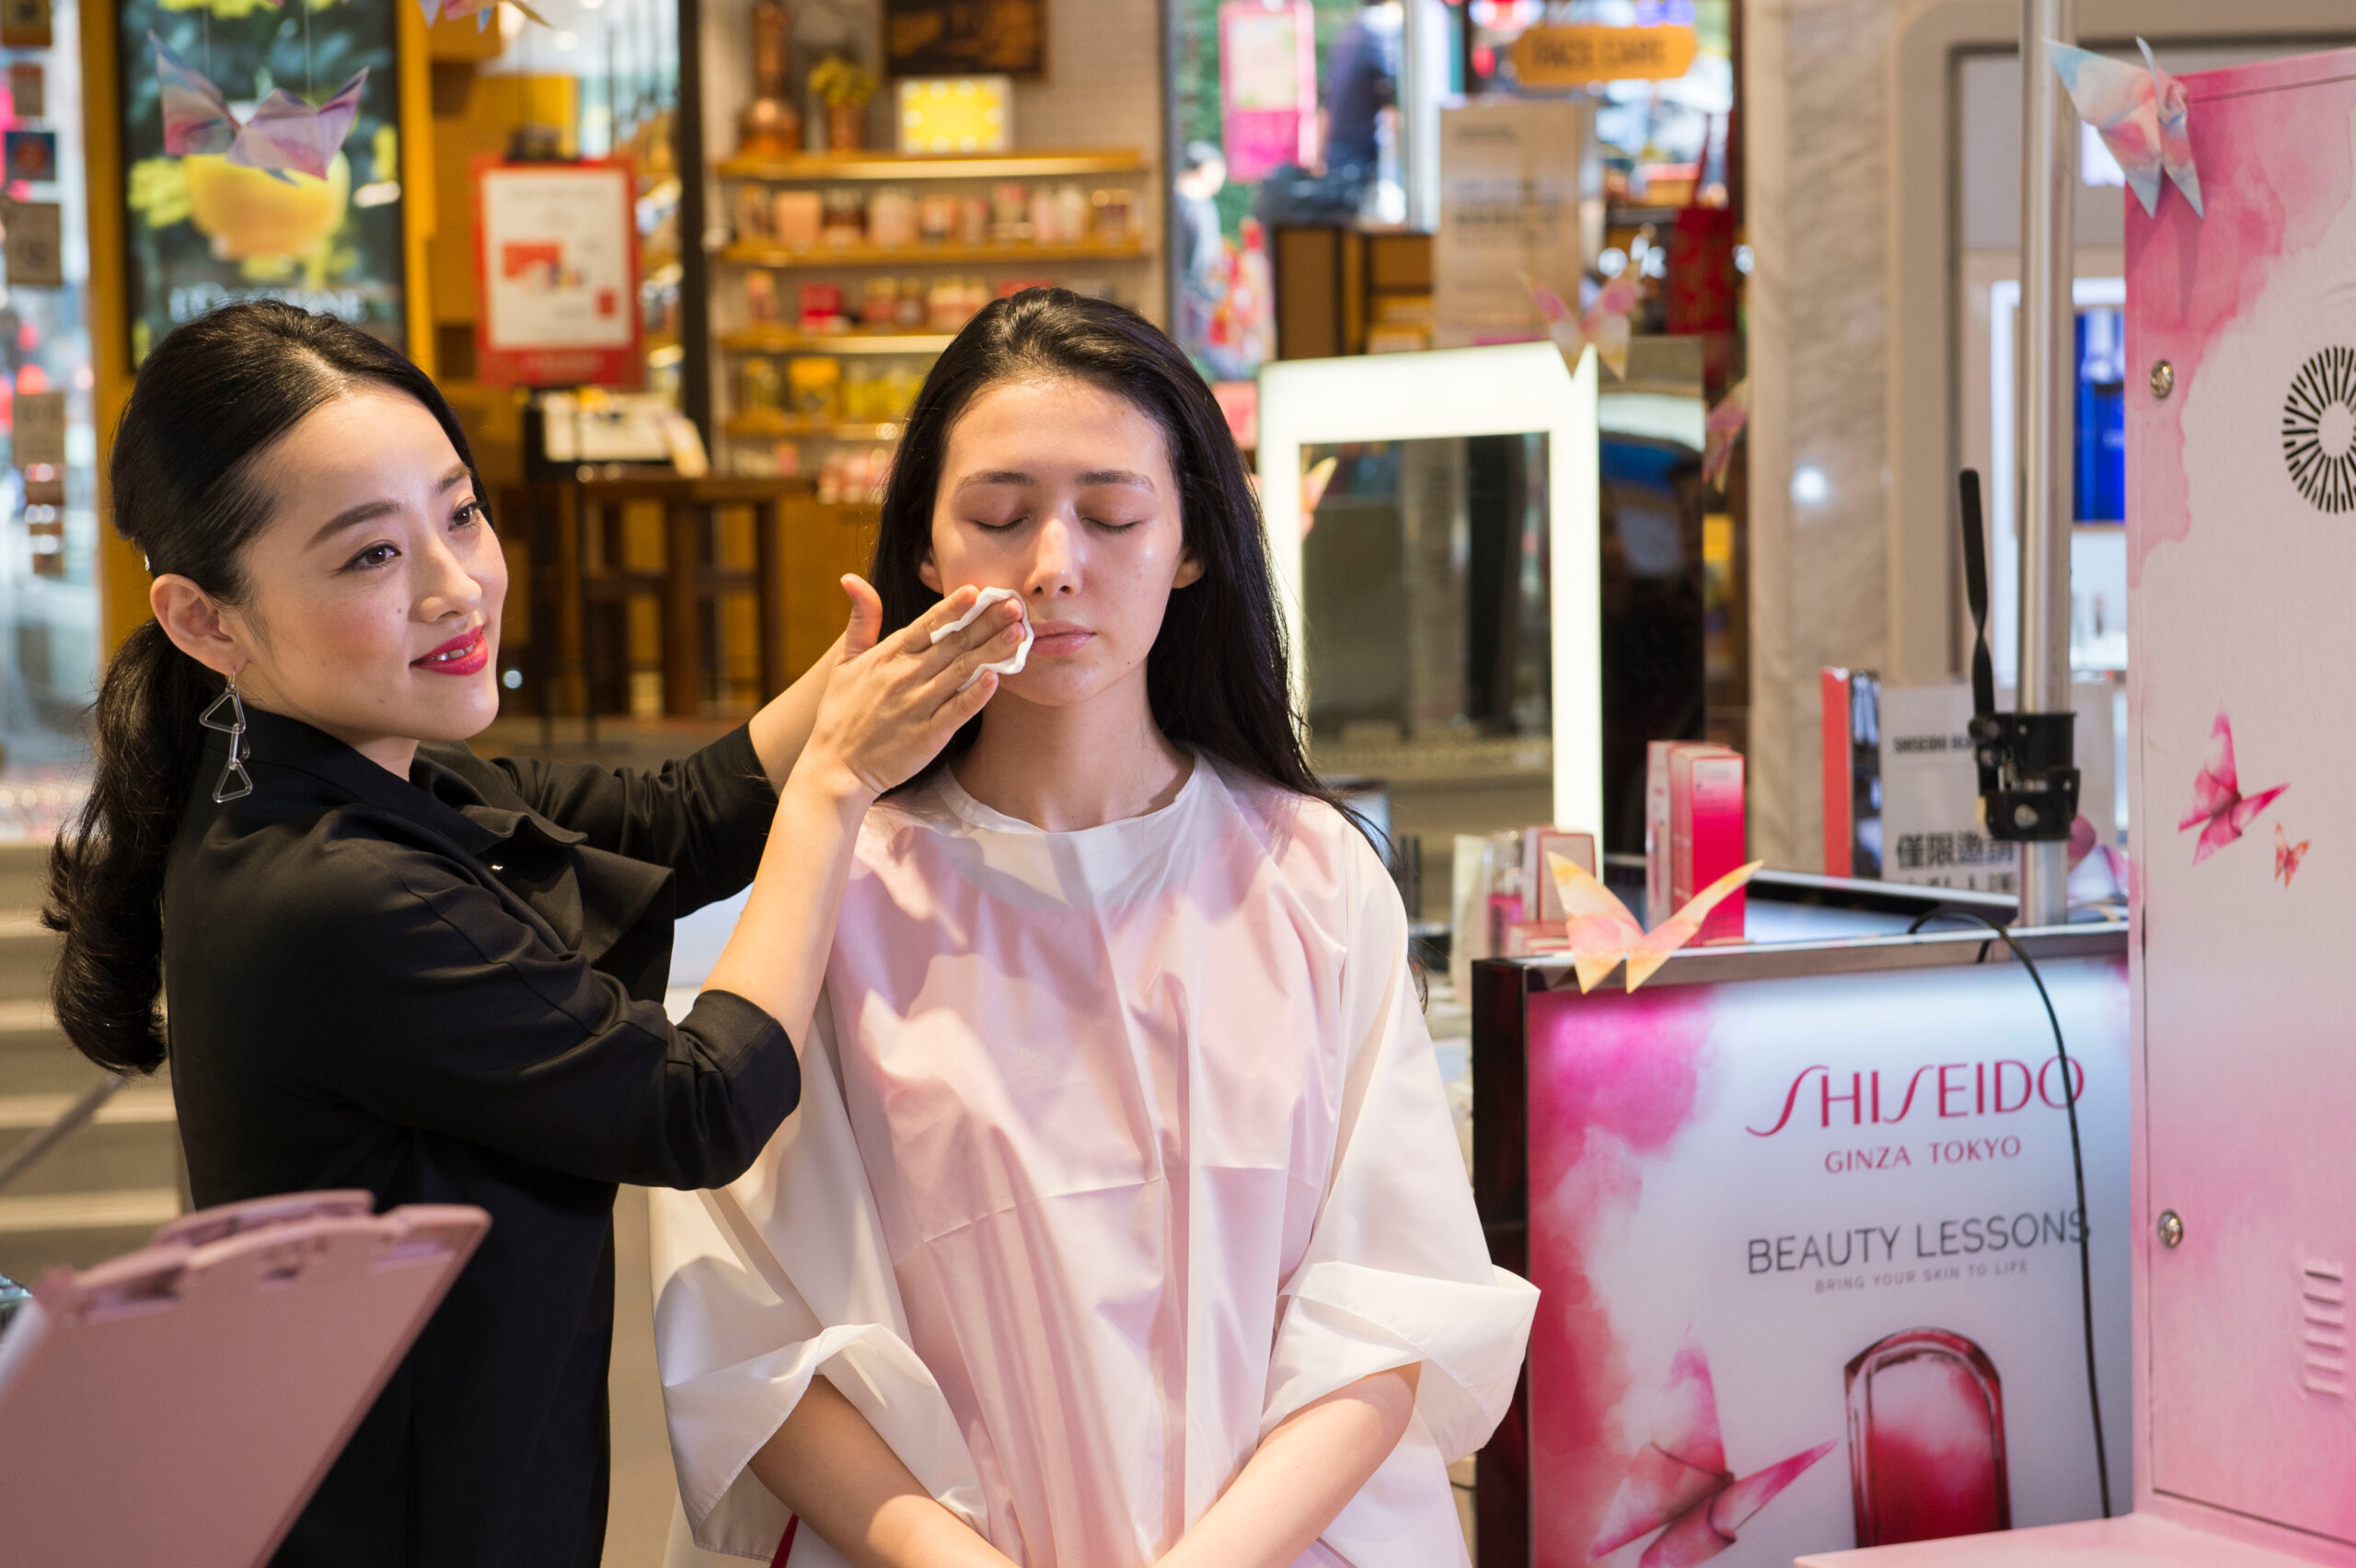 SHISEIDO Top Beauty Specialist Mika Kadoya is invited to perform skincare and makeup demonstration for the first time at the DFS & SHISEIDO event at T Galleria Beauty by DFS in Causeway Bay on 16 February 2017 in Hong Kong, China. Photo by Marcio Rodrigo Machado / studioEAST